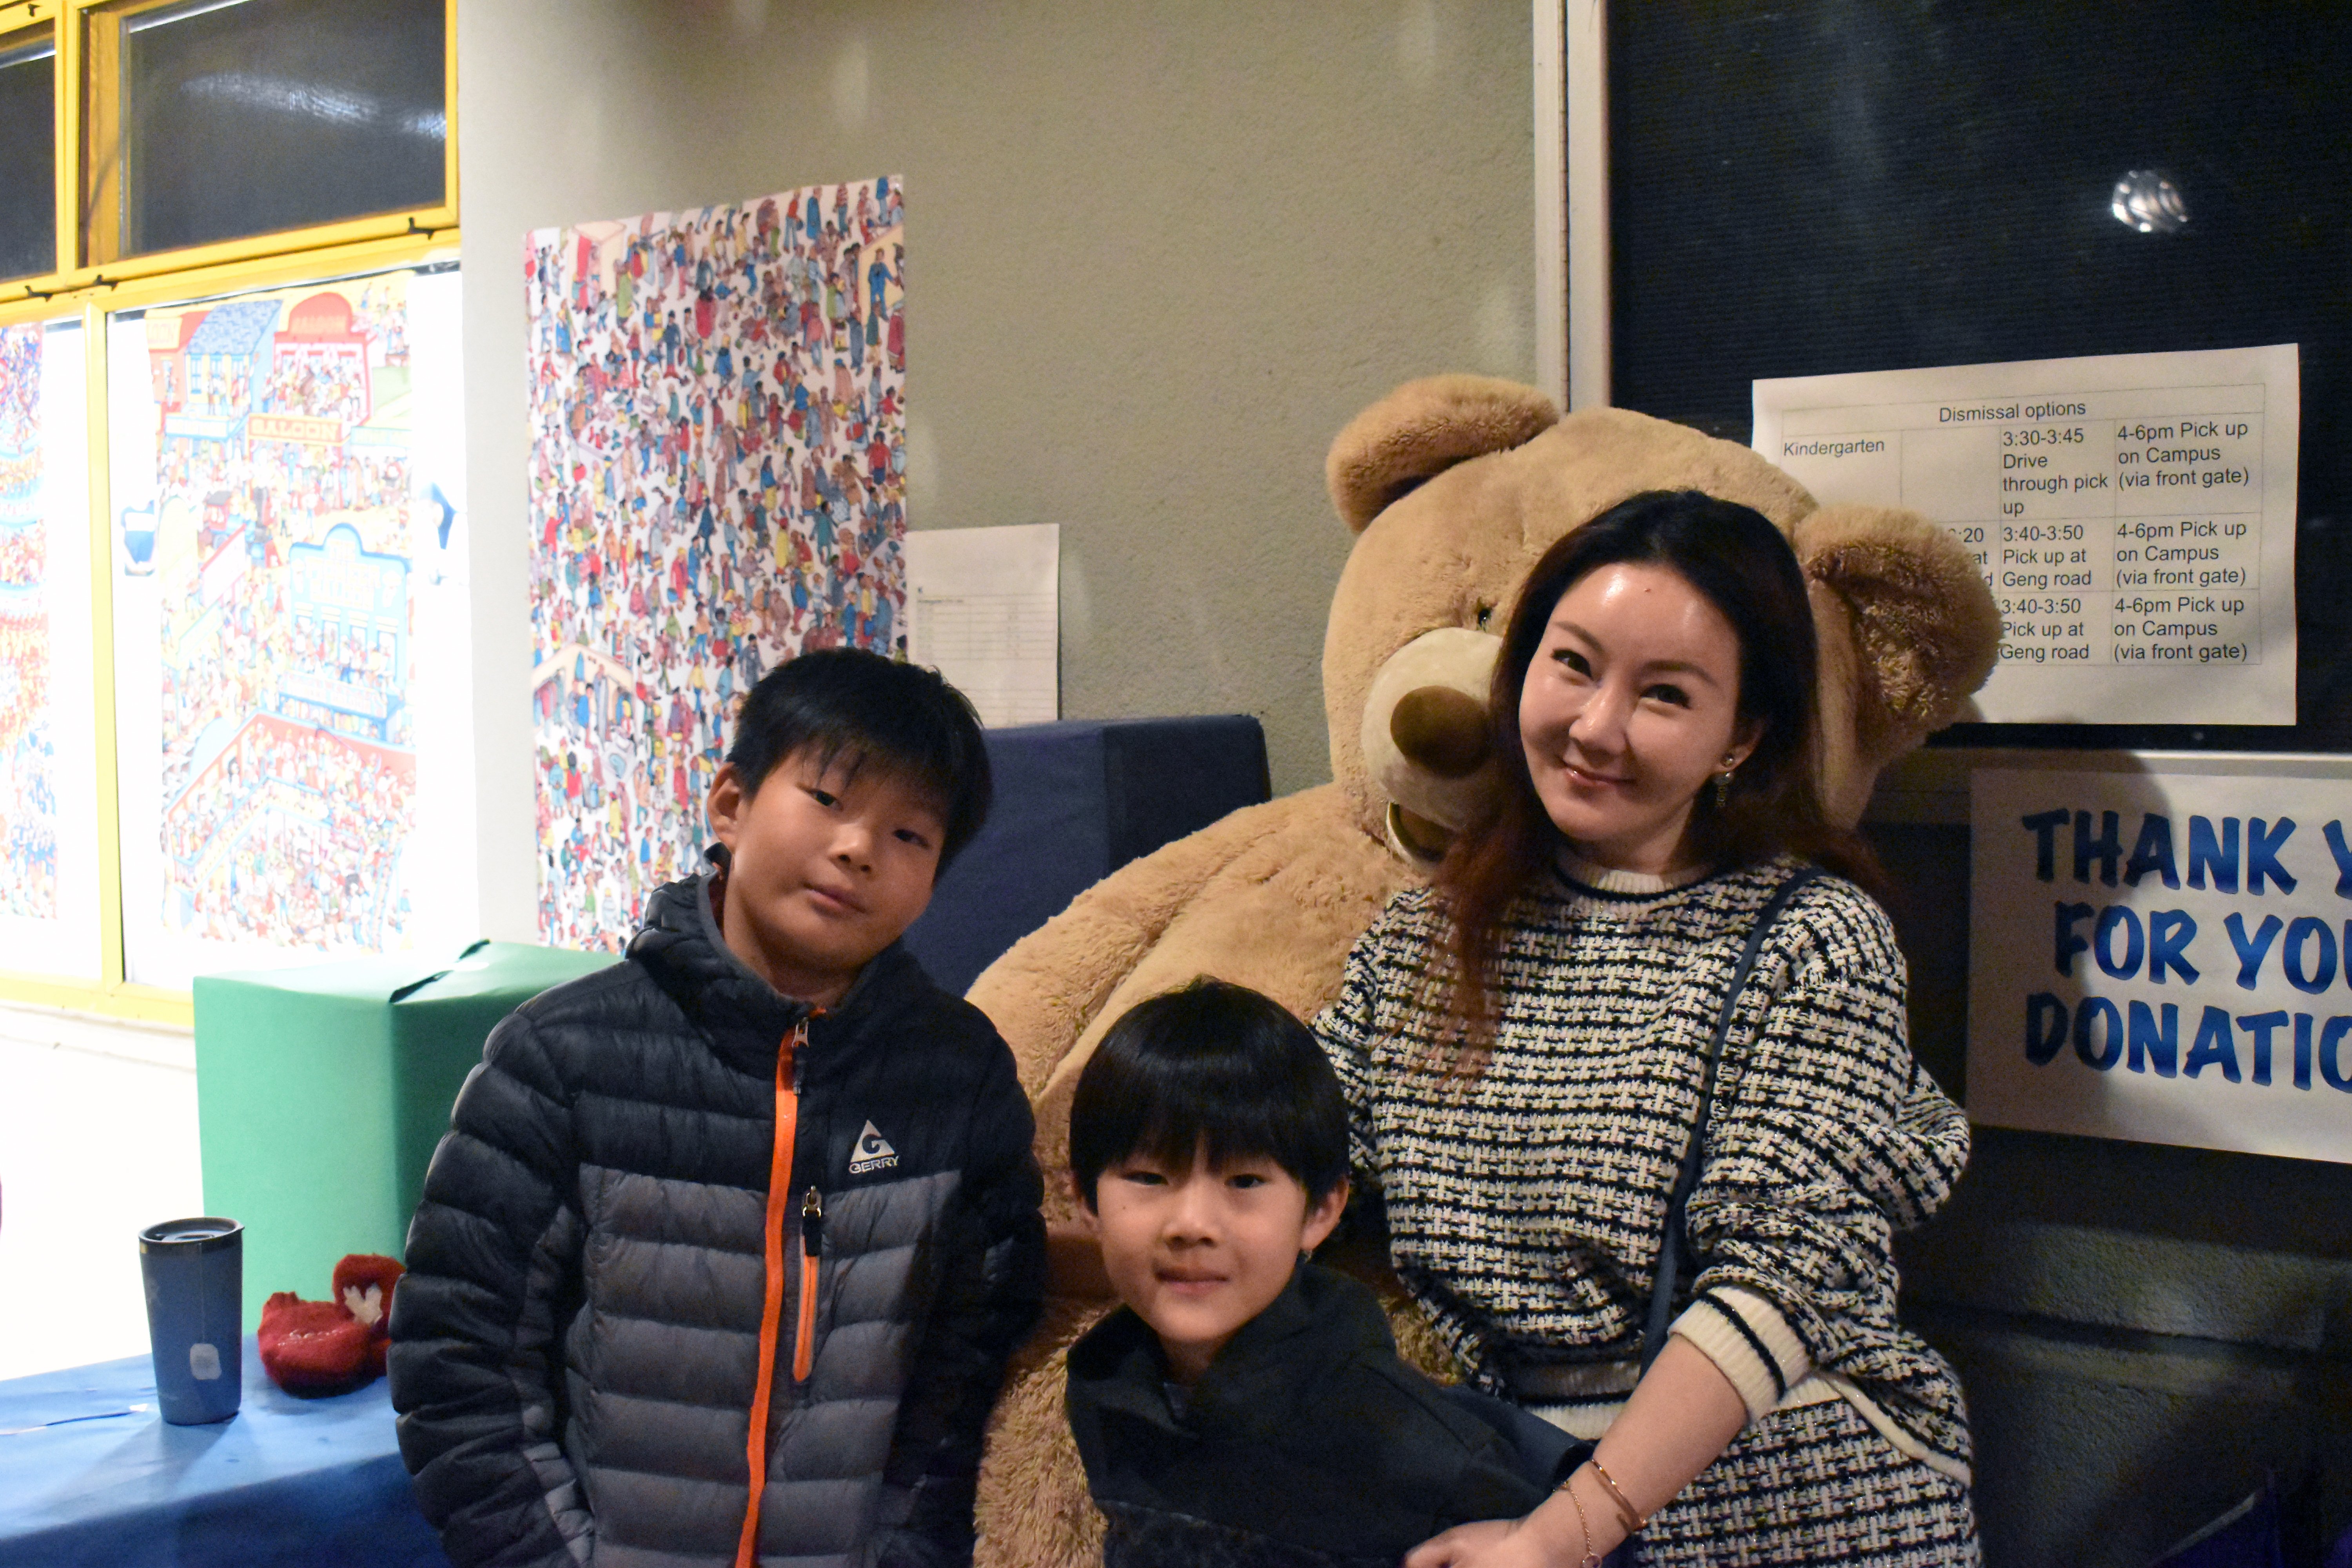 Mom and her two sons pose for a photo in front of the giant teddy bear outside of the Arts Night entrance.